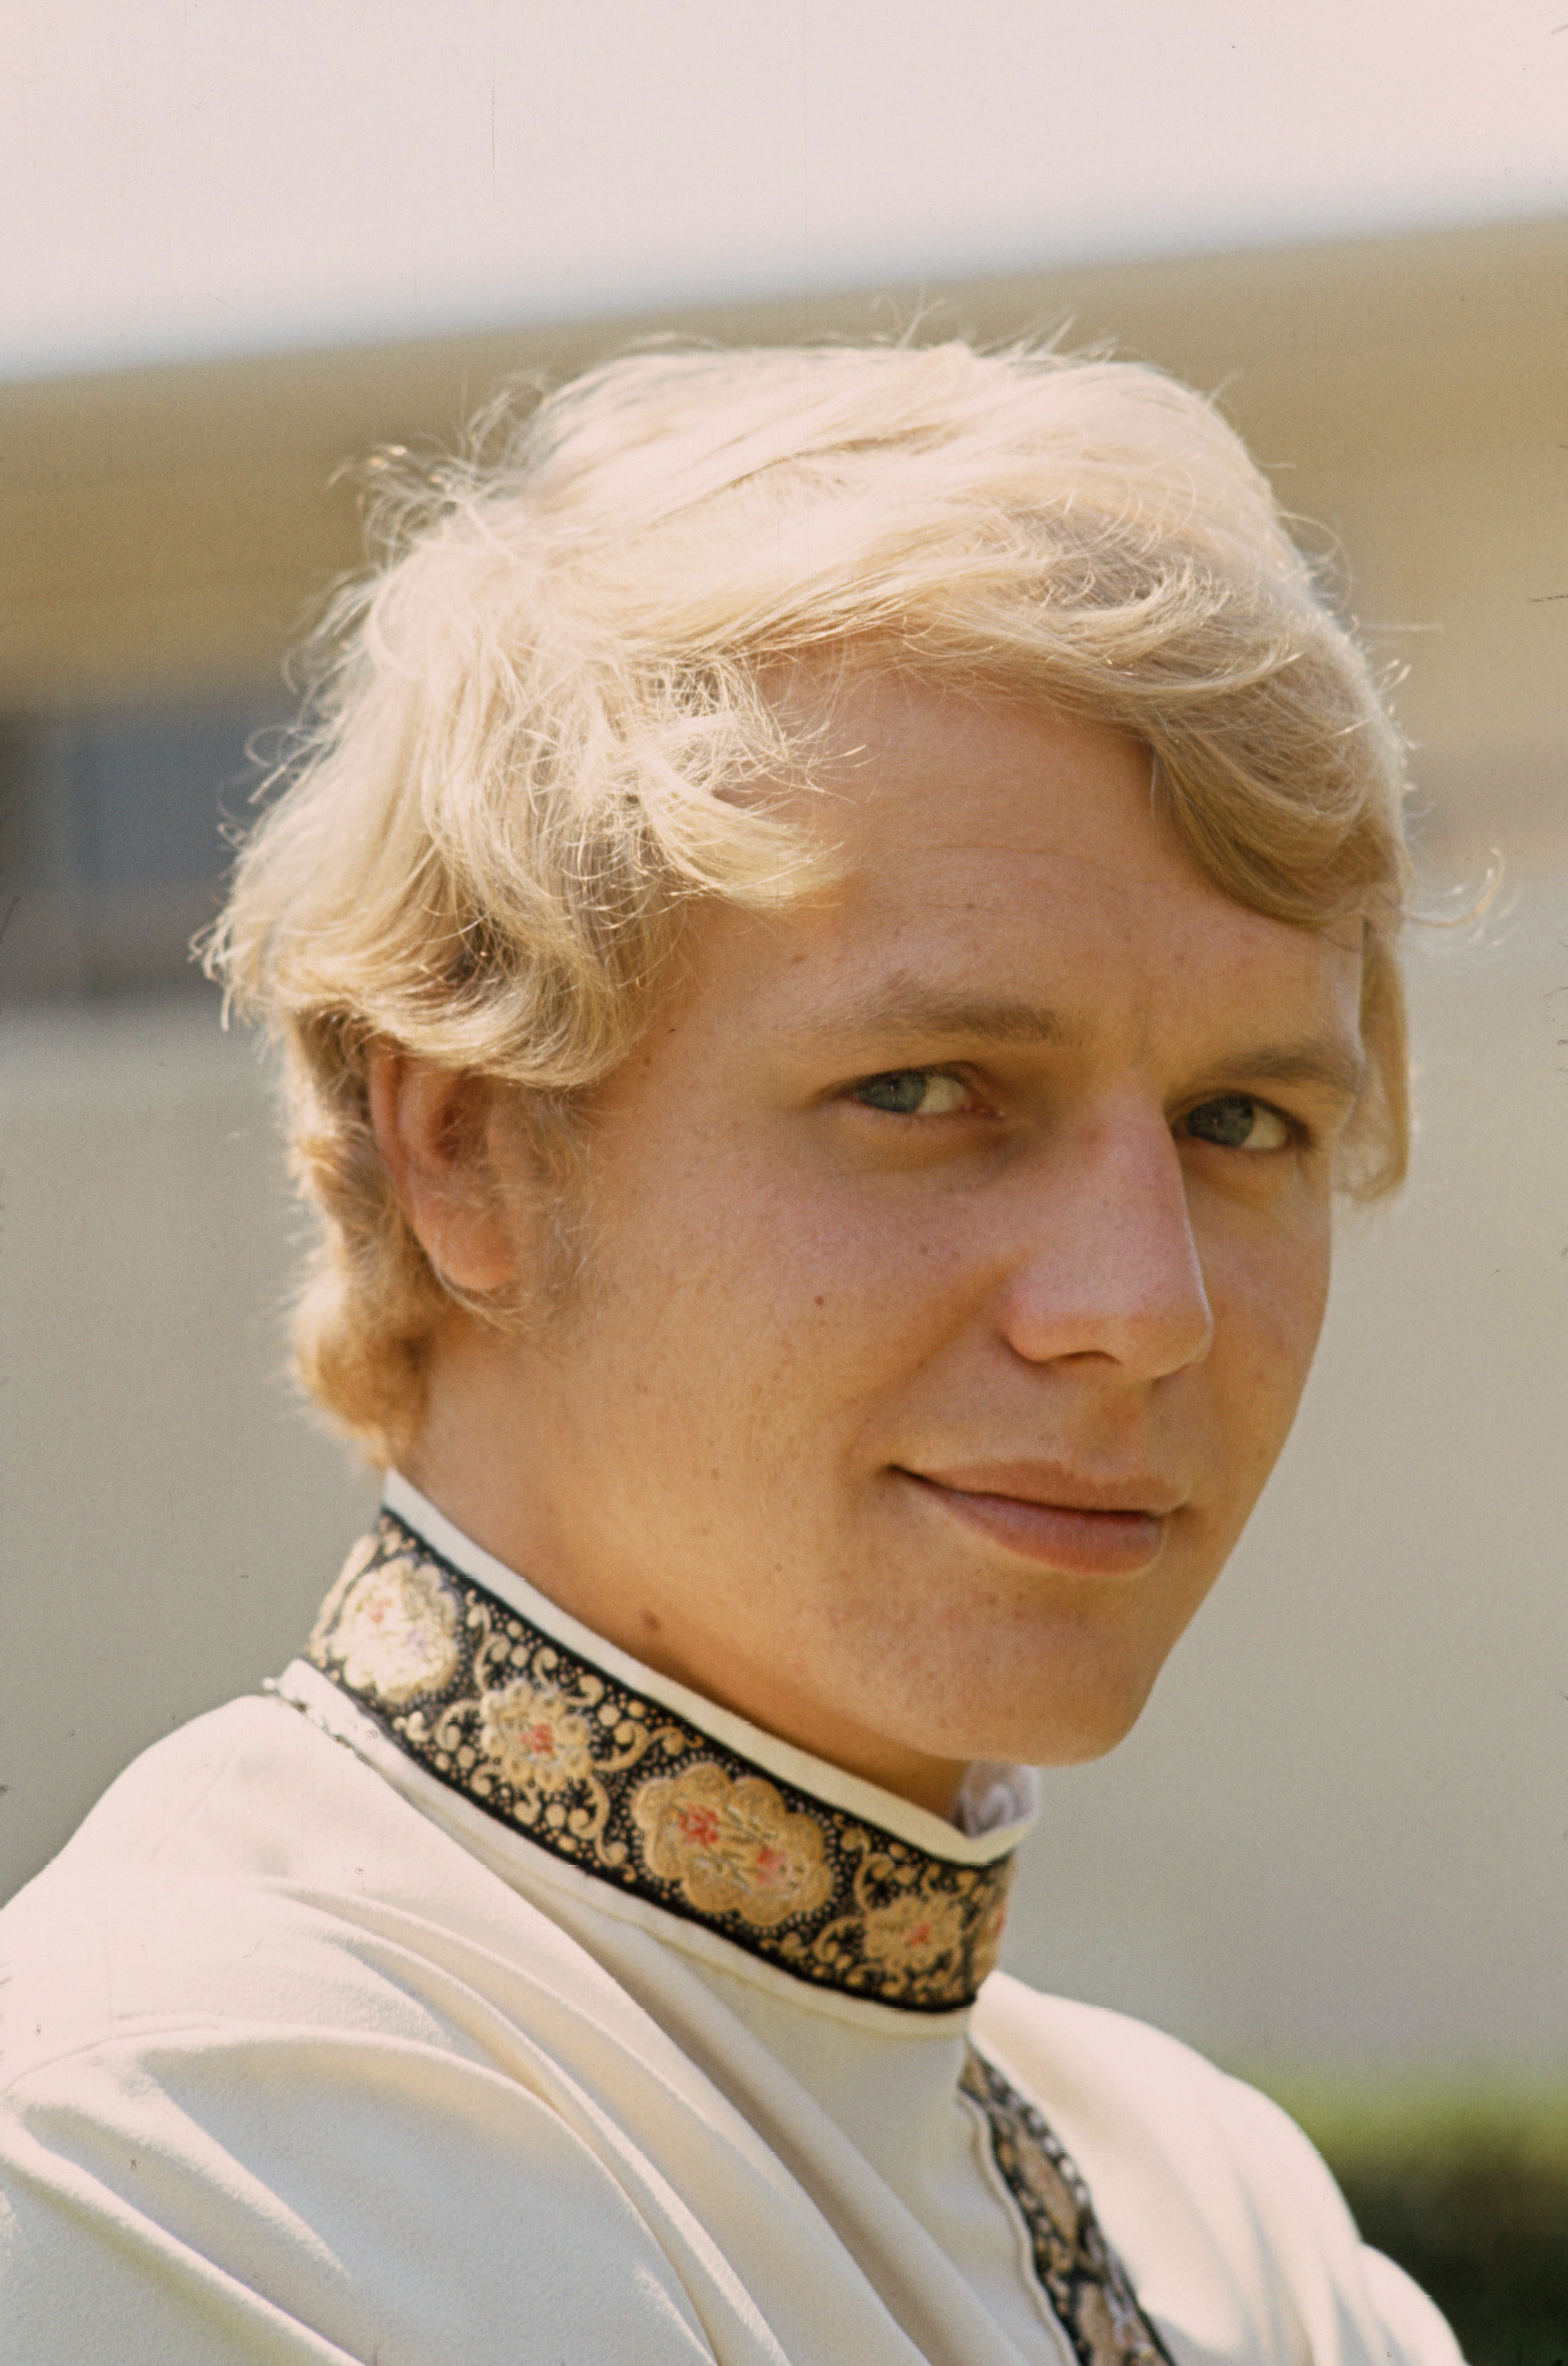 David Soul on "Here Comes the Brides" | Source: Getty Images